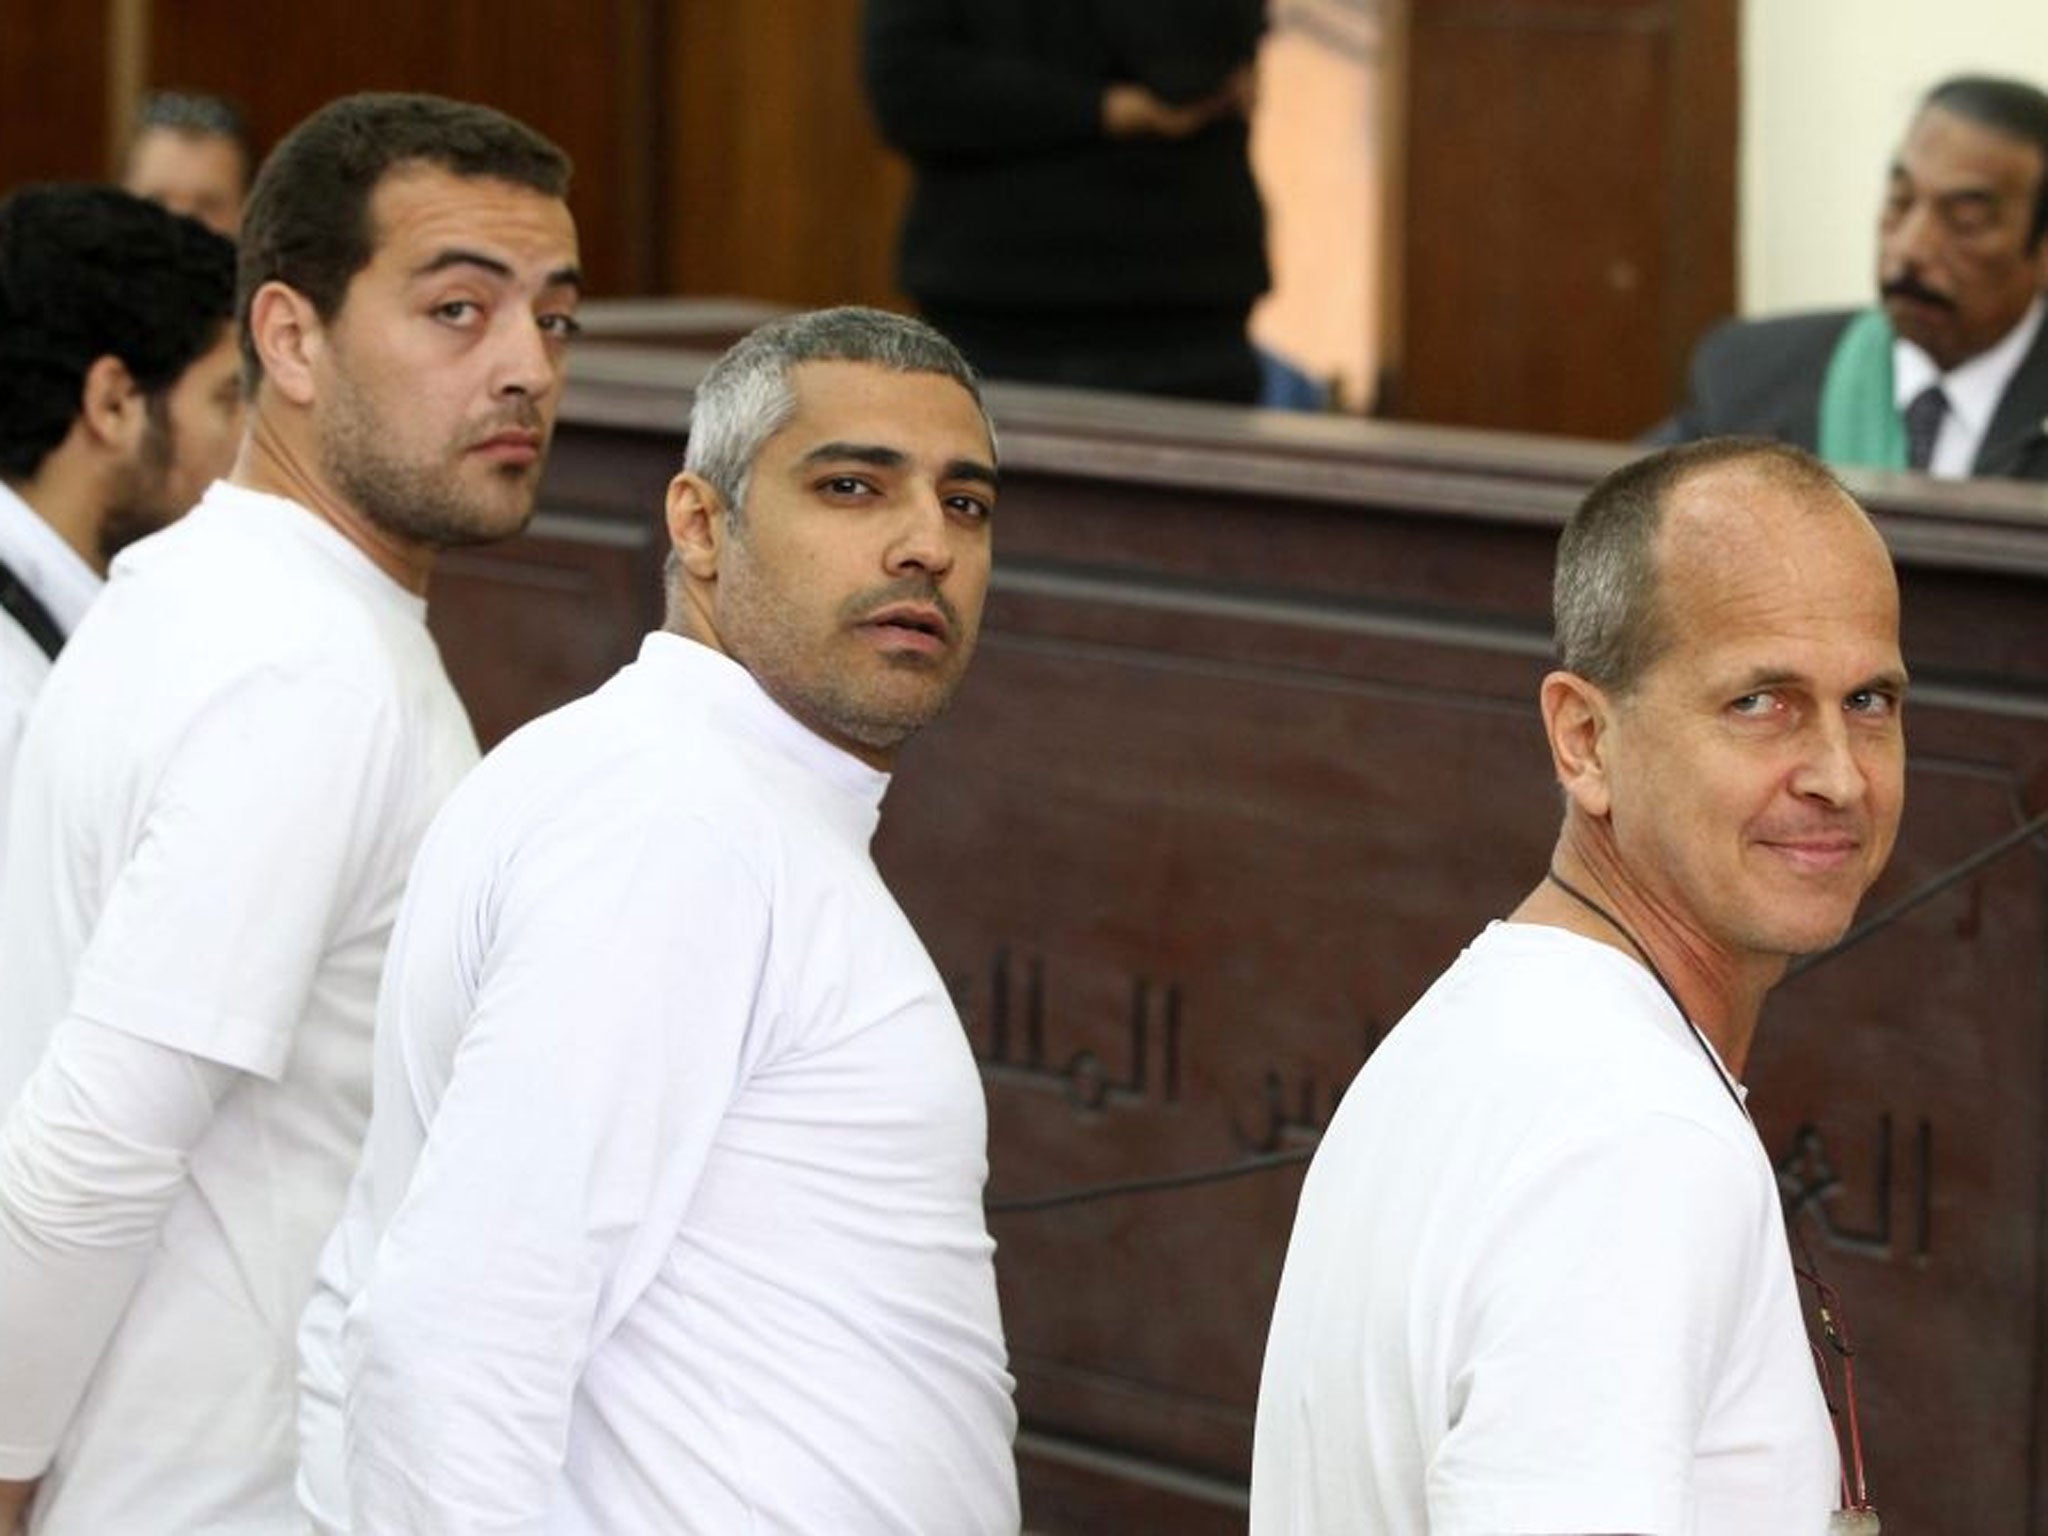 Australian journalist Peter Greste (R), Mohamed Fahmy, Baher Mohamed stand in front of the judge's bench during their trial for allegedly supporting a terrorist group and spreading false information, in Cairo, Egypt, 31 March 2014. 